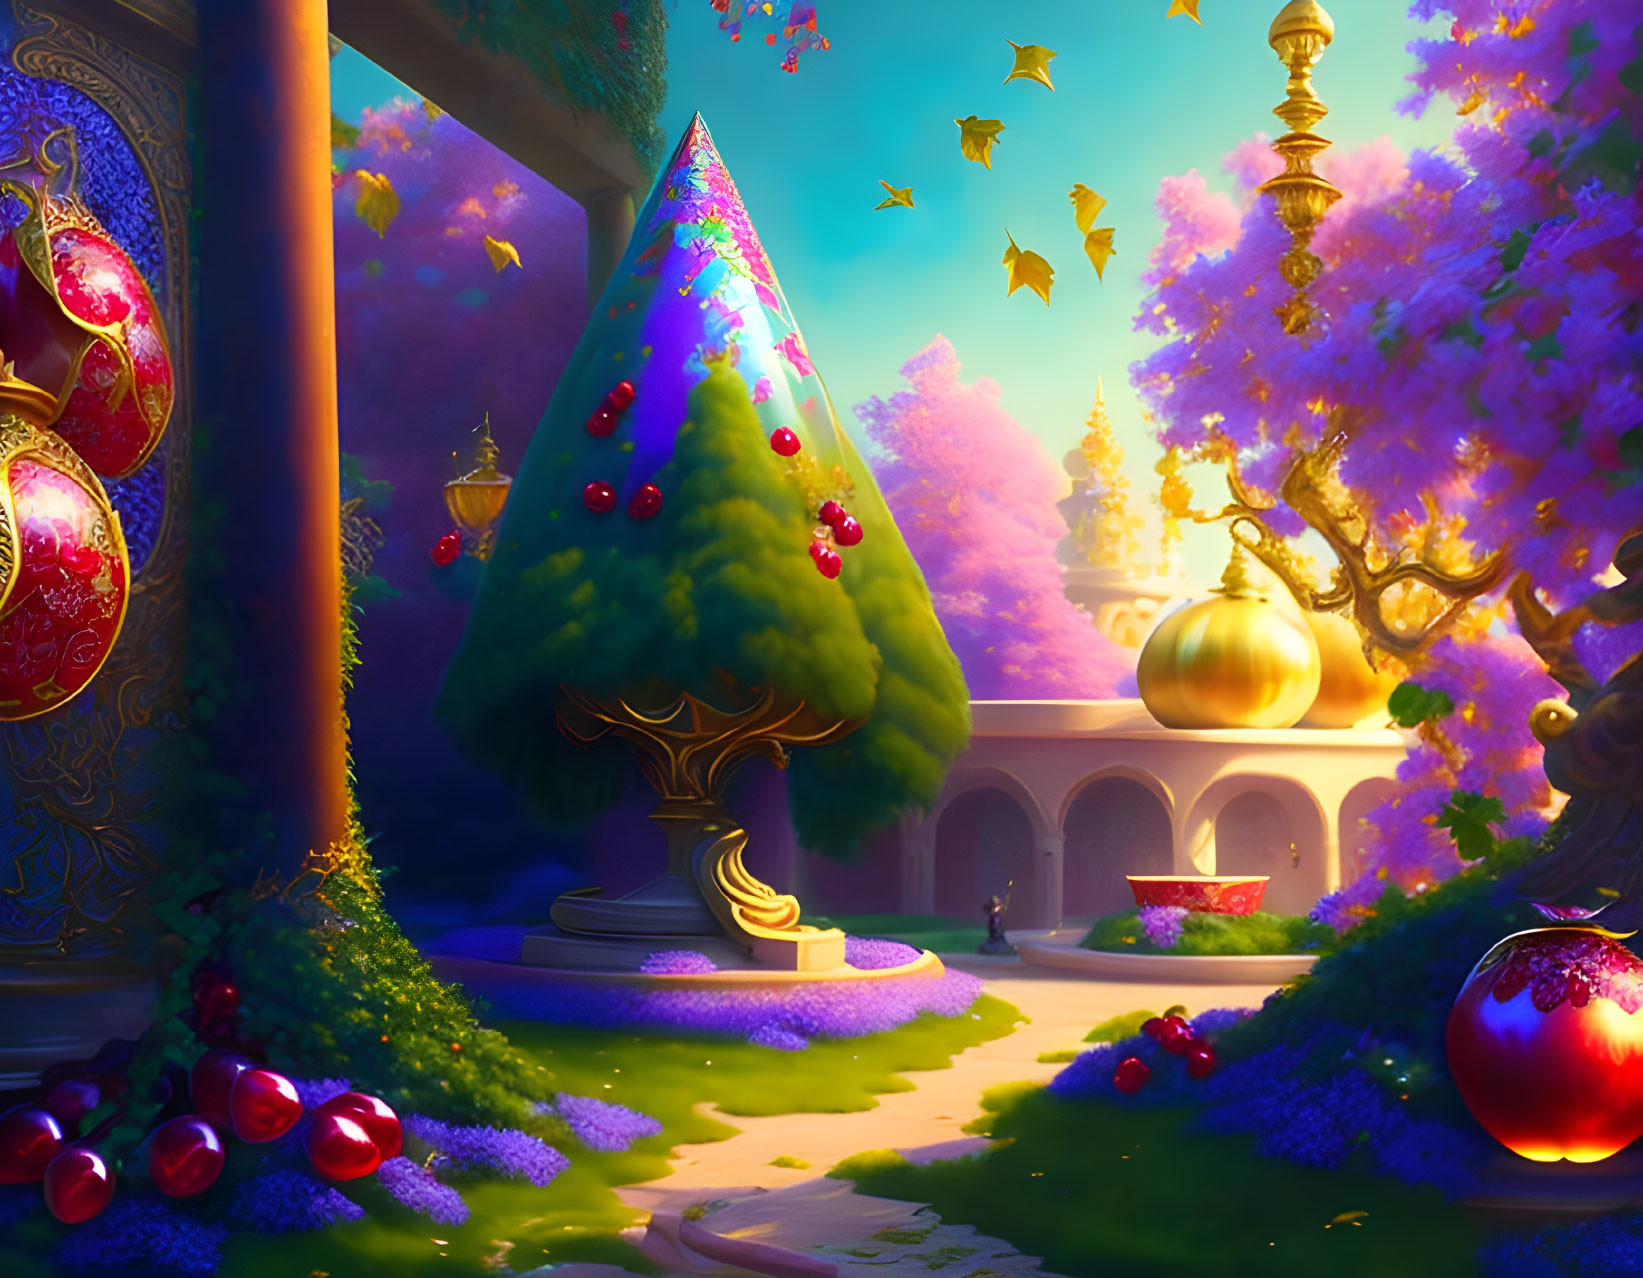 Fantasy garden with jeweled tree, cherry blossoms, palace, and floating ornaments